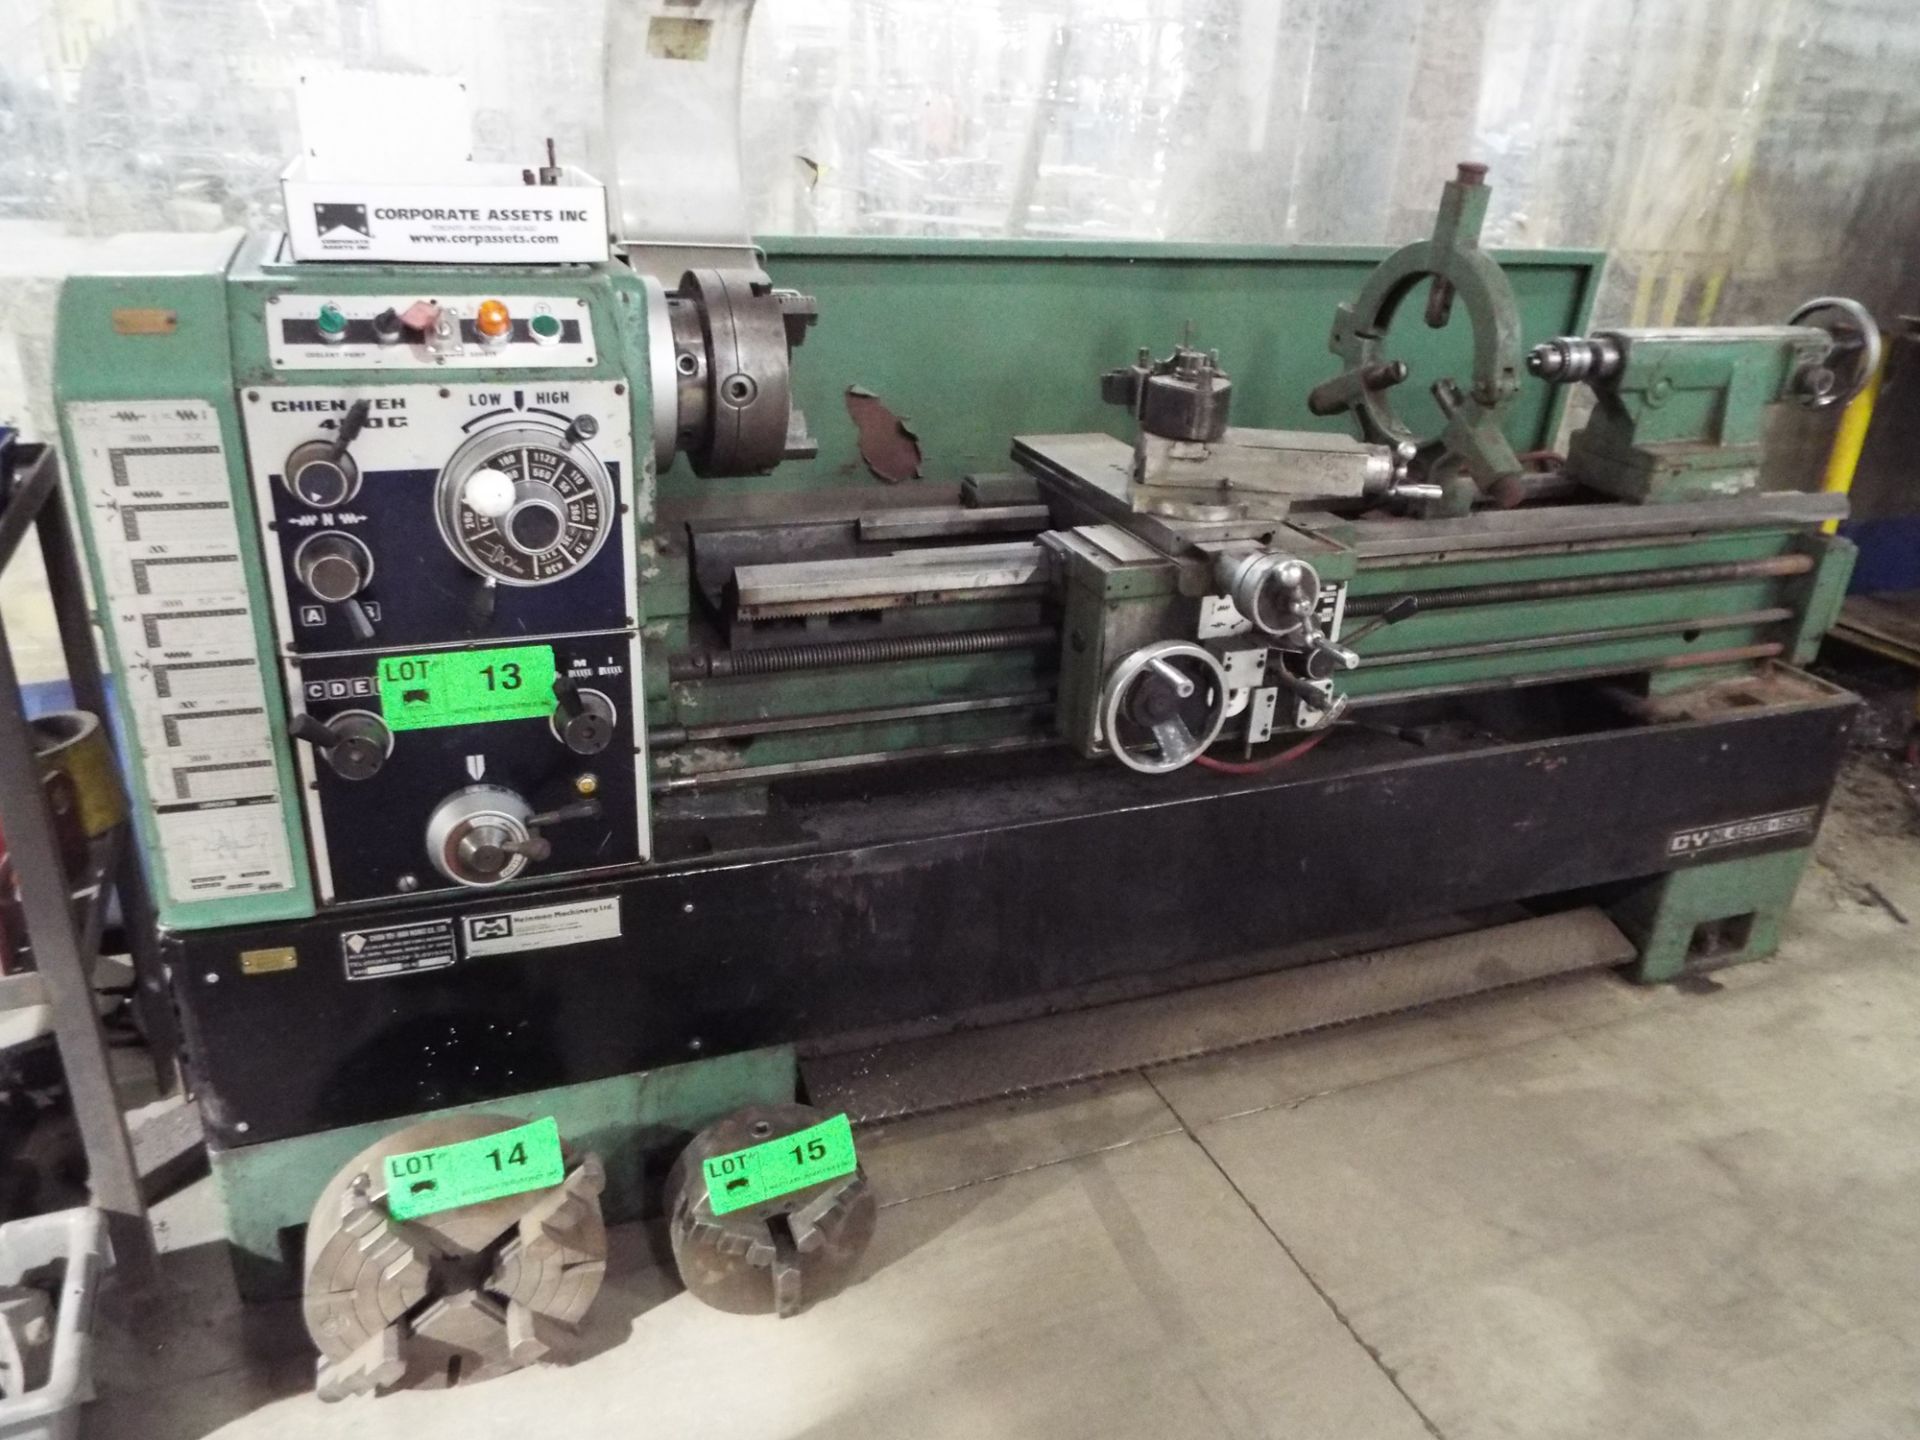 CHIEN YEH 450G GAP BED ENGINE LATHE WITH 18" SWING OVER BED, 58" BETWEEN CENTERS, SPEEDS TO 1800 - Image 2 of 6